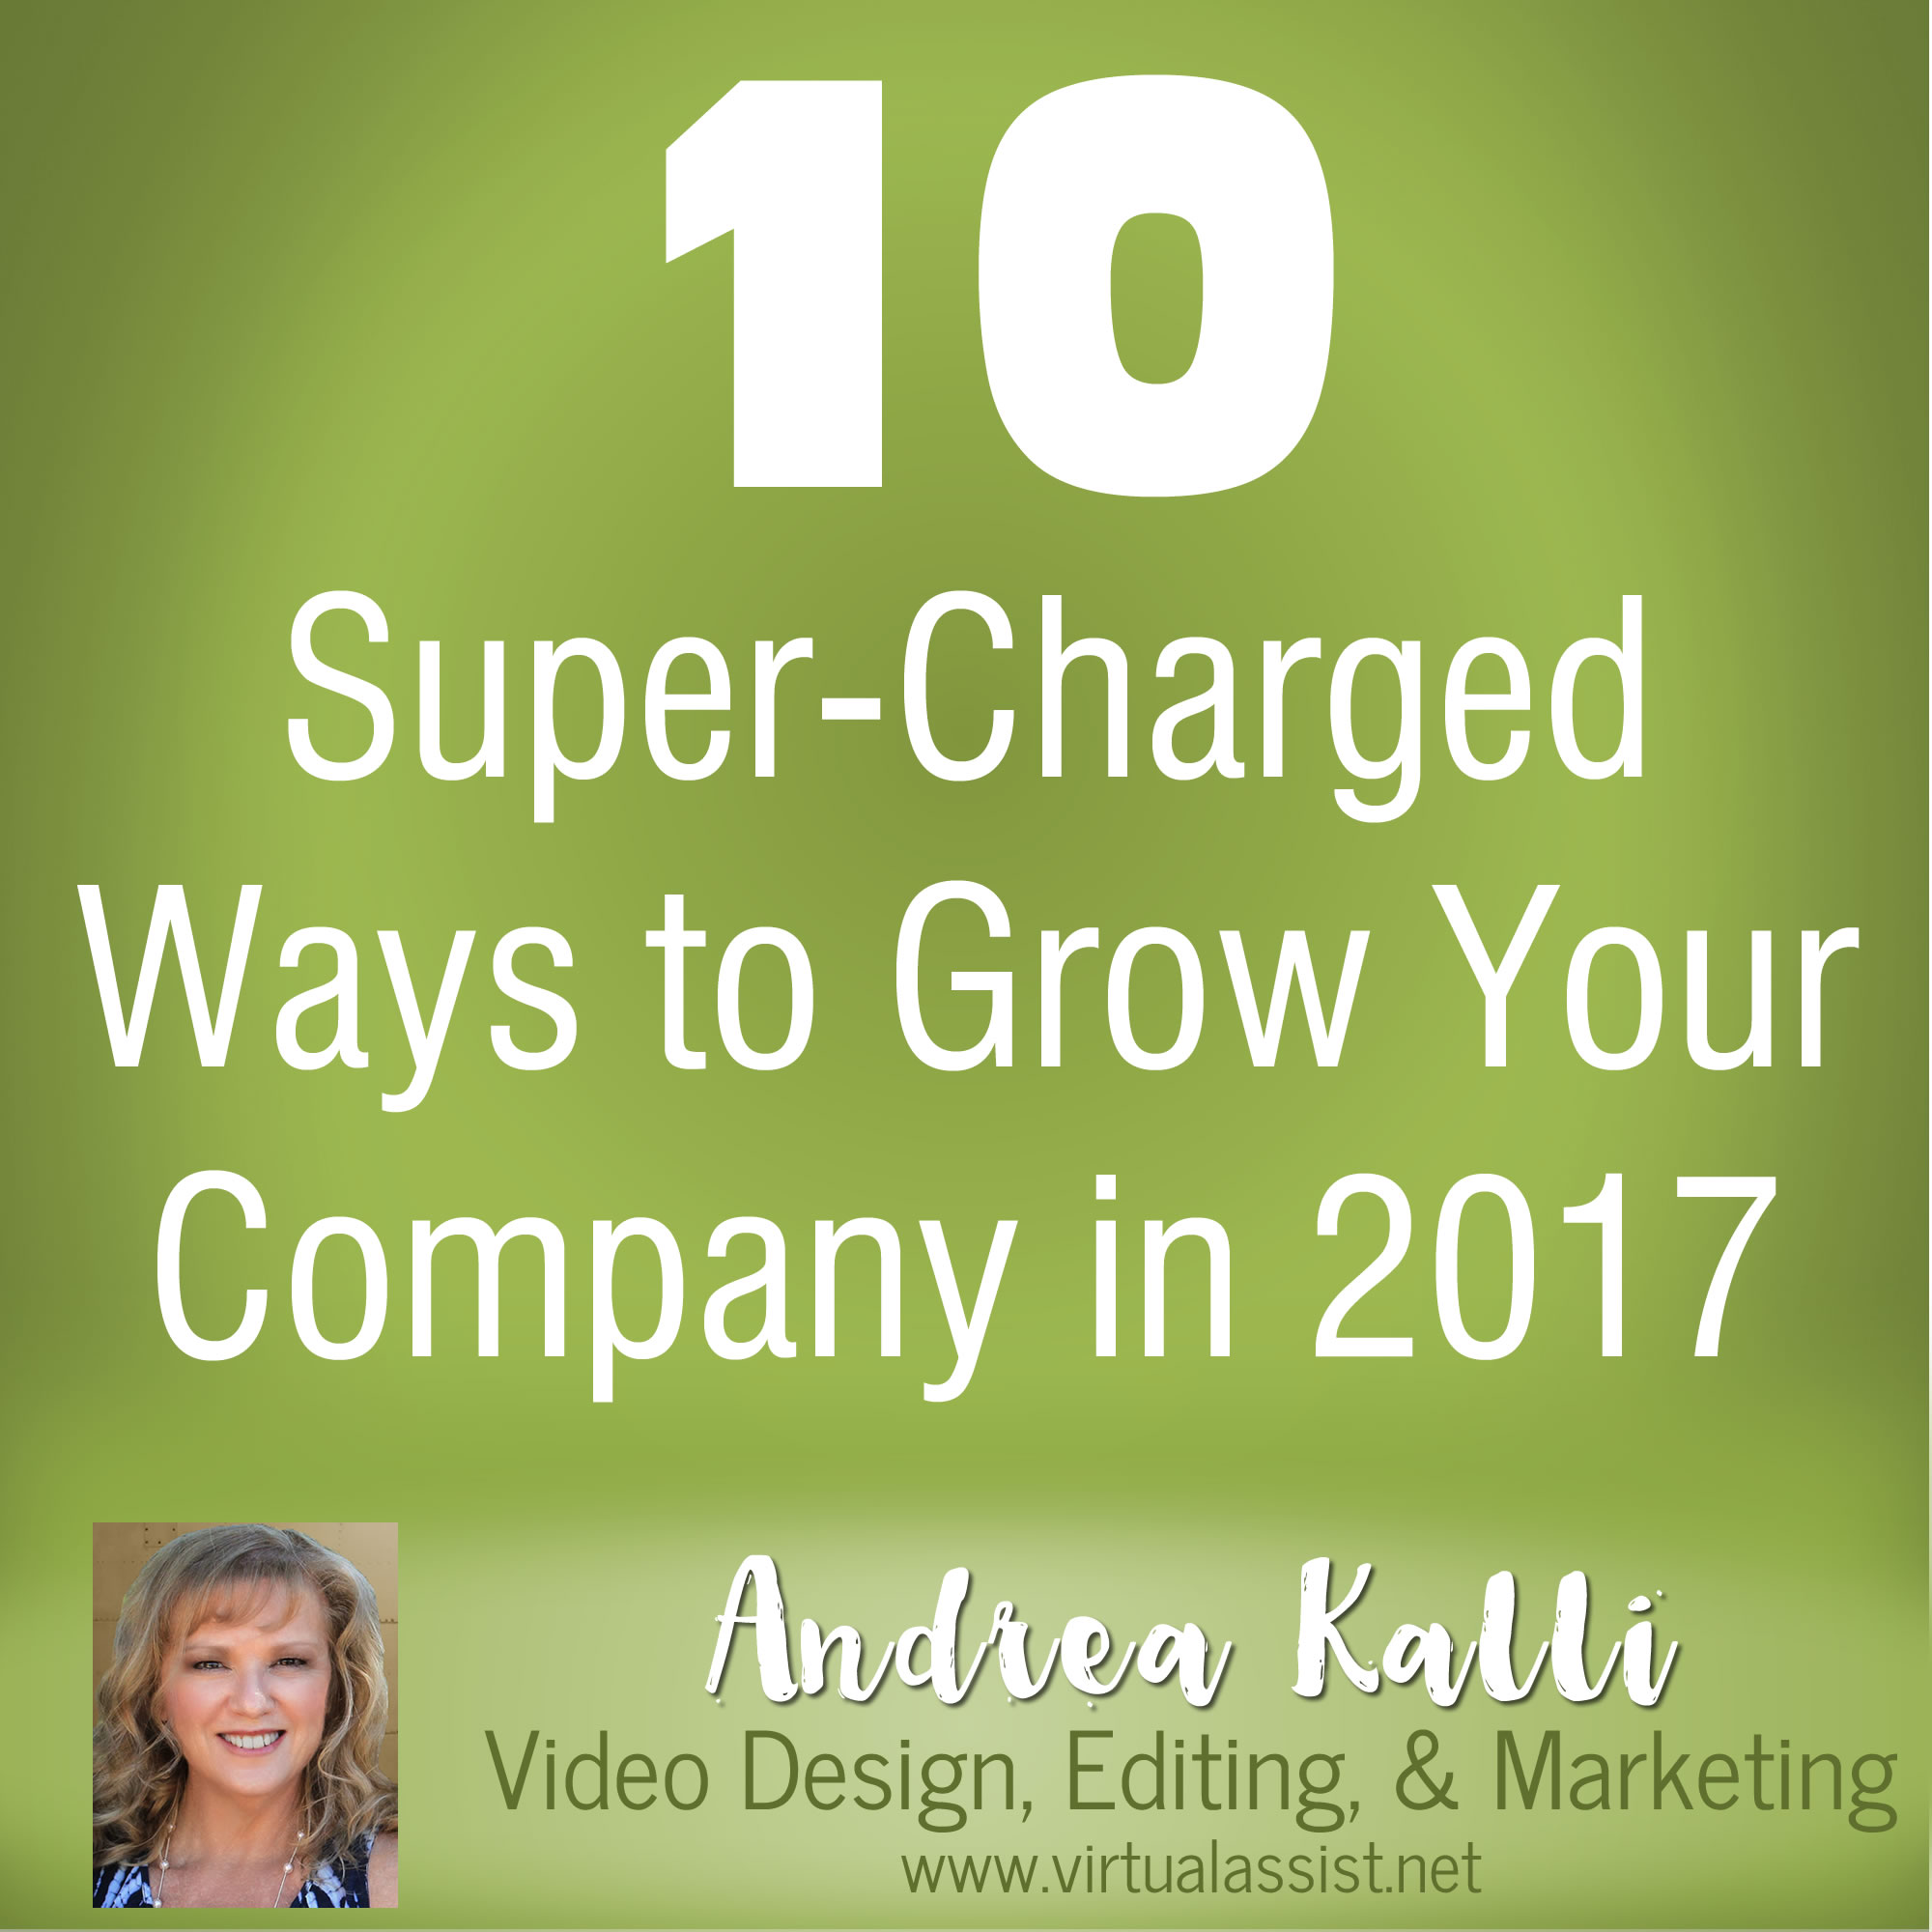 10 Super-Charged Ways to Grow Your Company in 2017